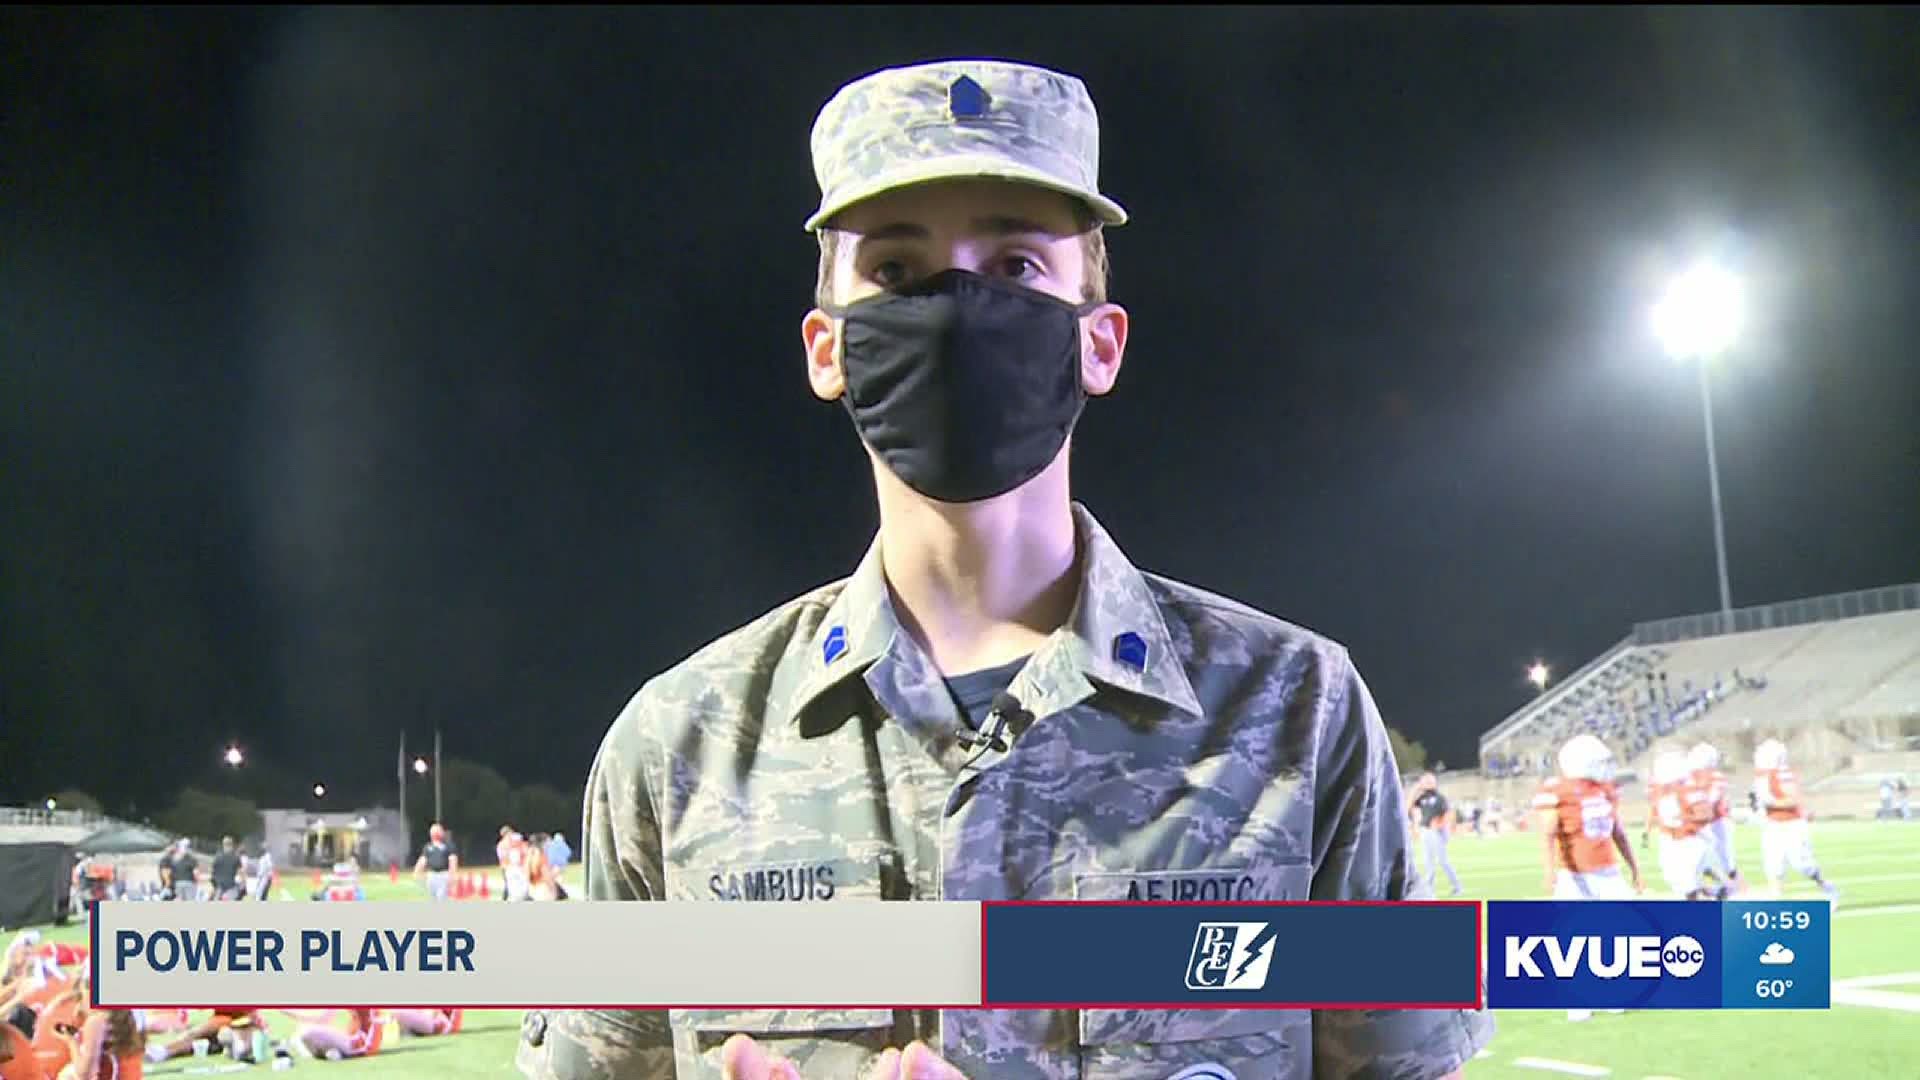 This week's Power Player of the Week is Westwood's Robin Sambus. He is a junior in ROTC.